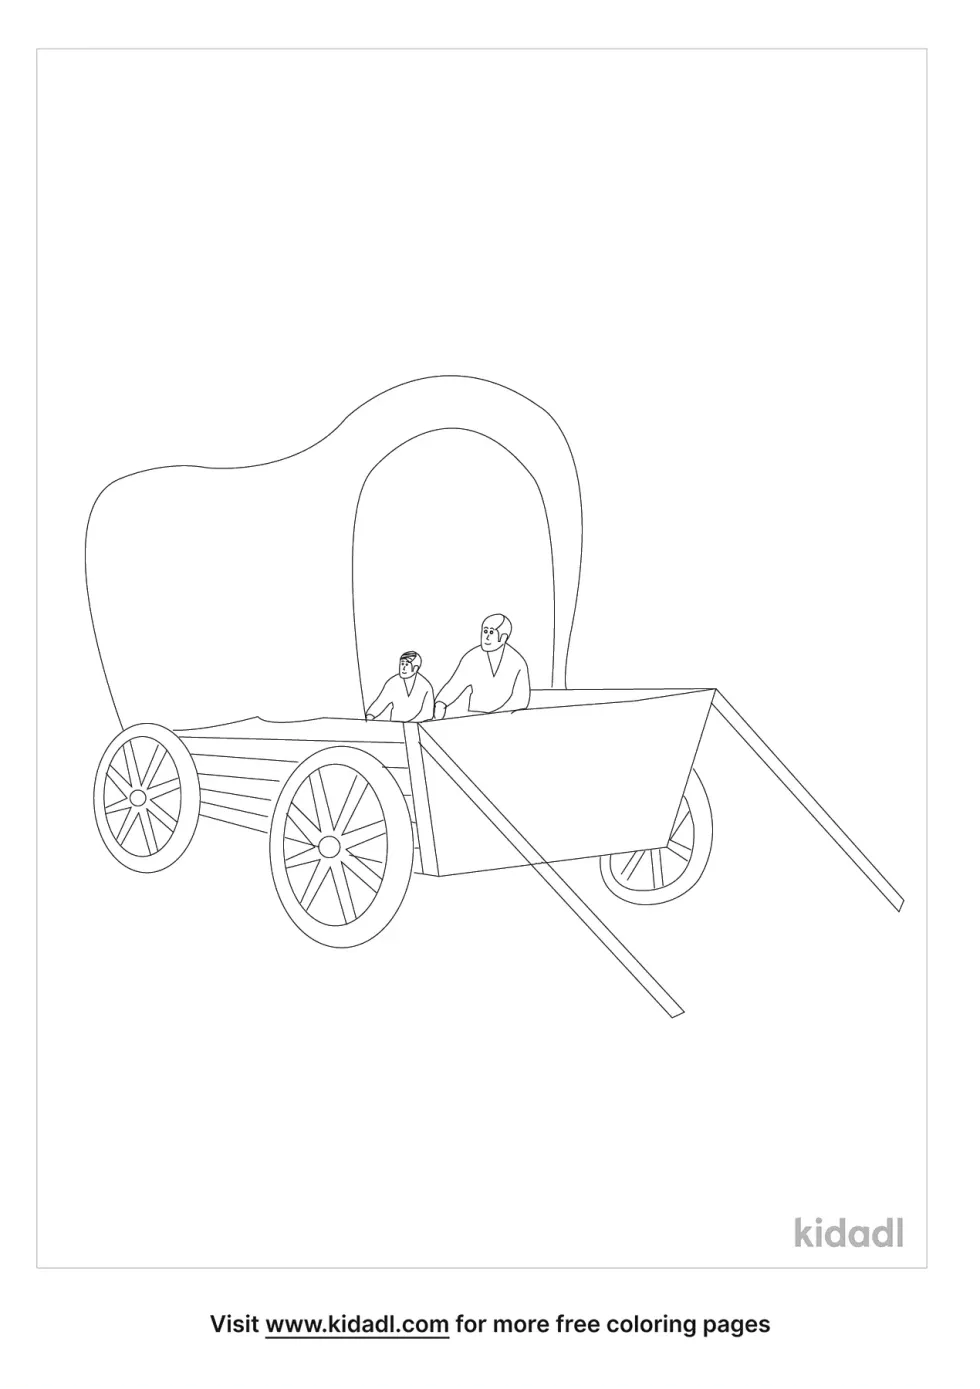 Wagon With People Coloring Page